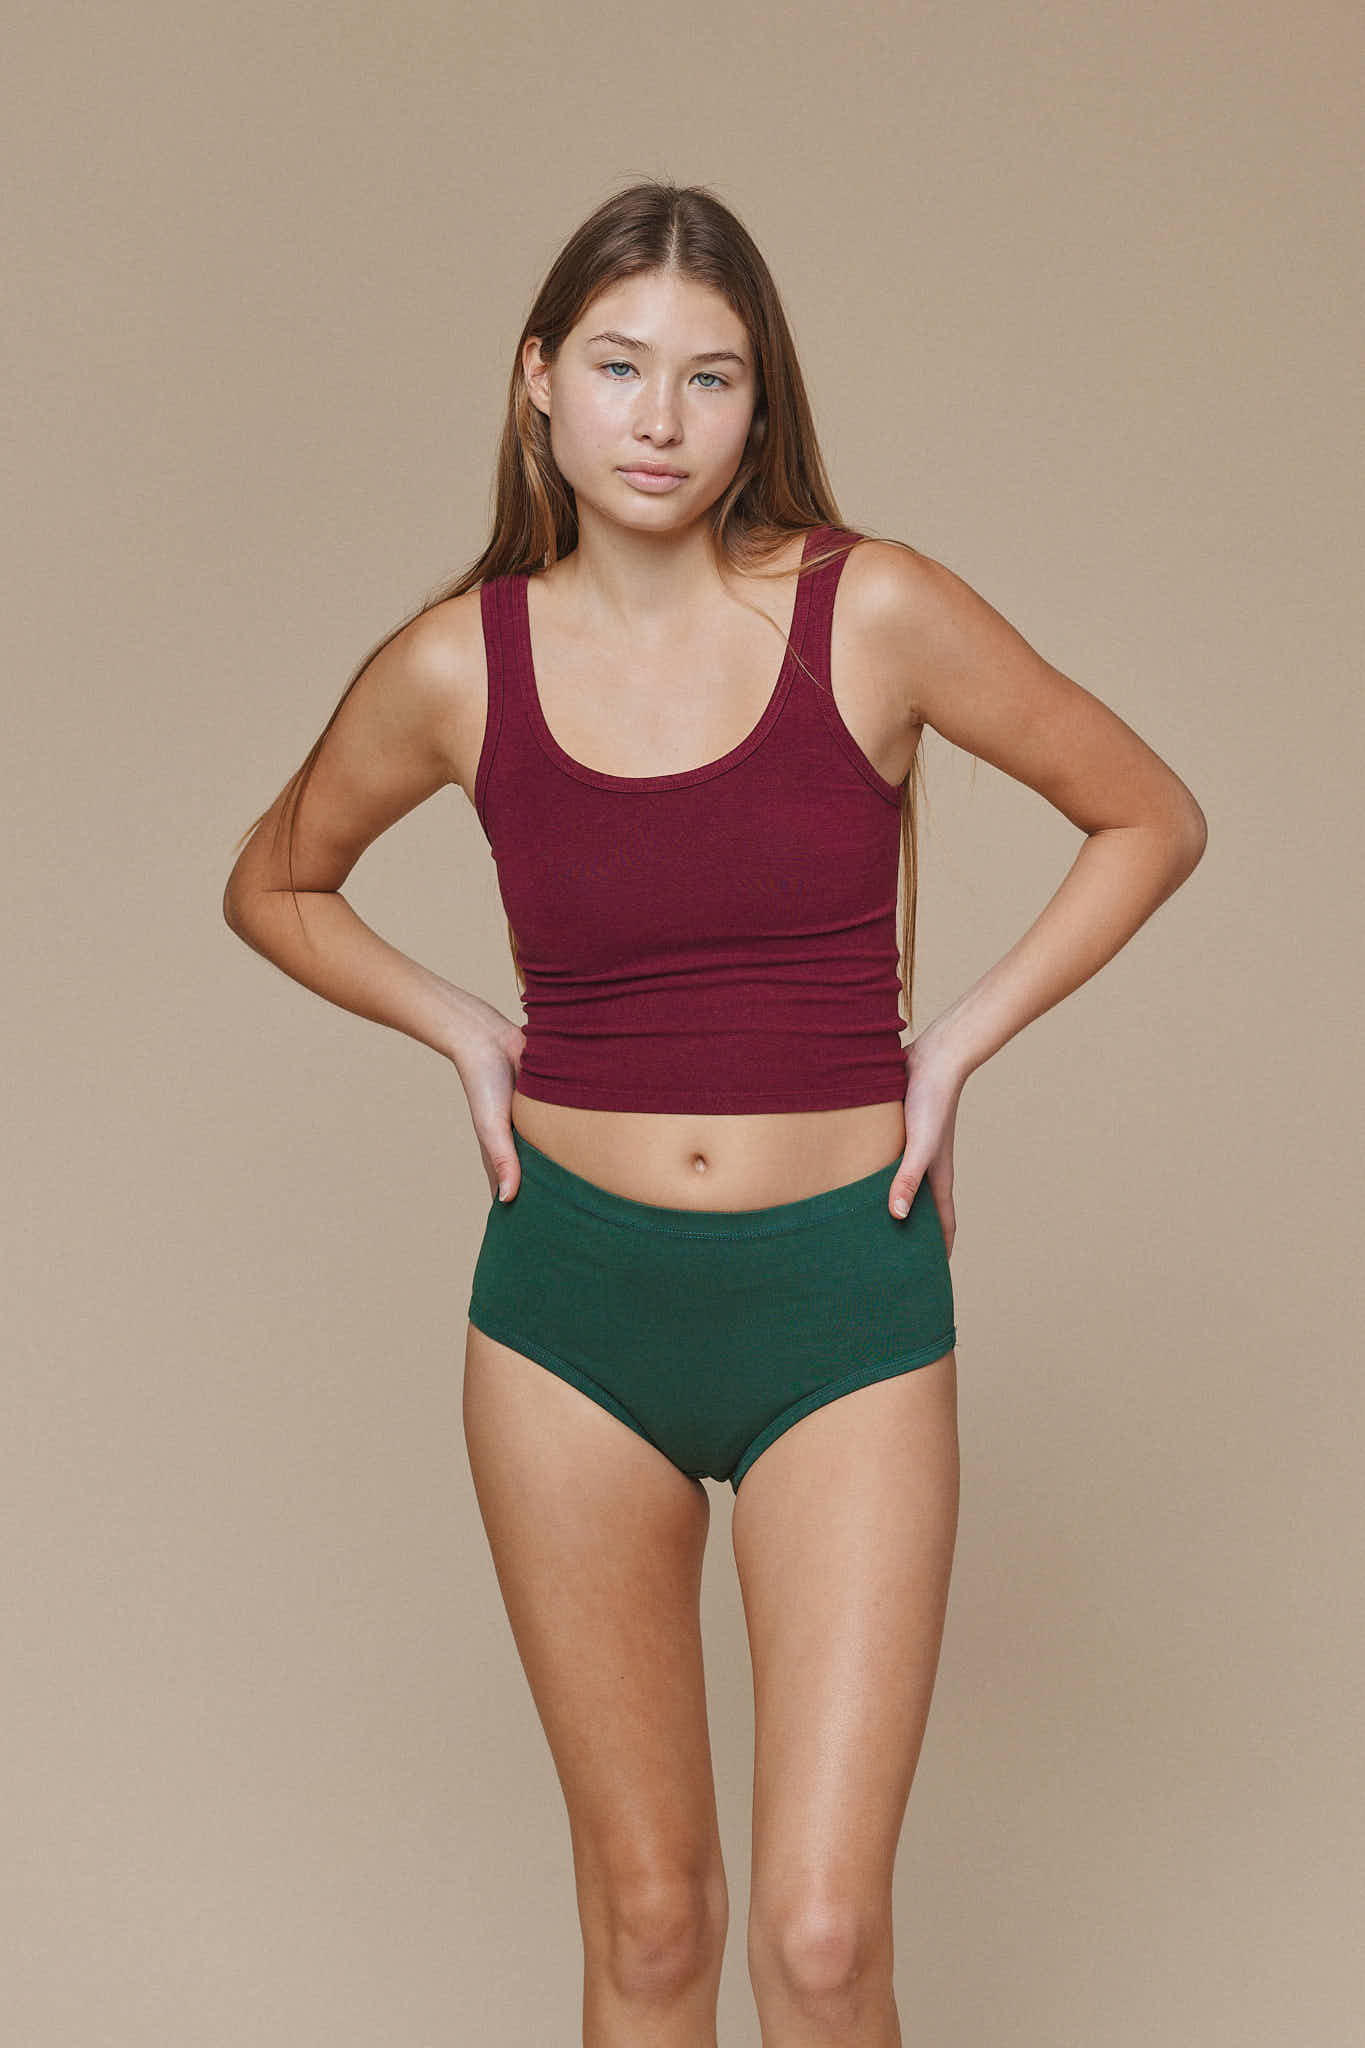 Organic Stretch Cotton Women's Low Rise Underwear in Natural, Made in USA,  Eco Friendly 